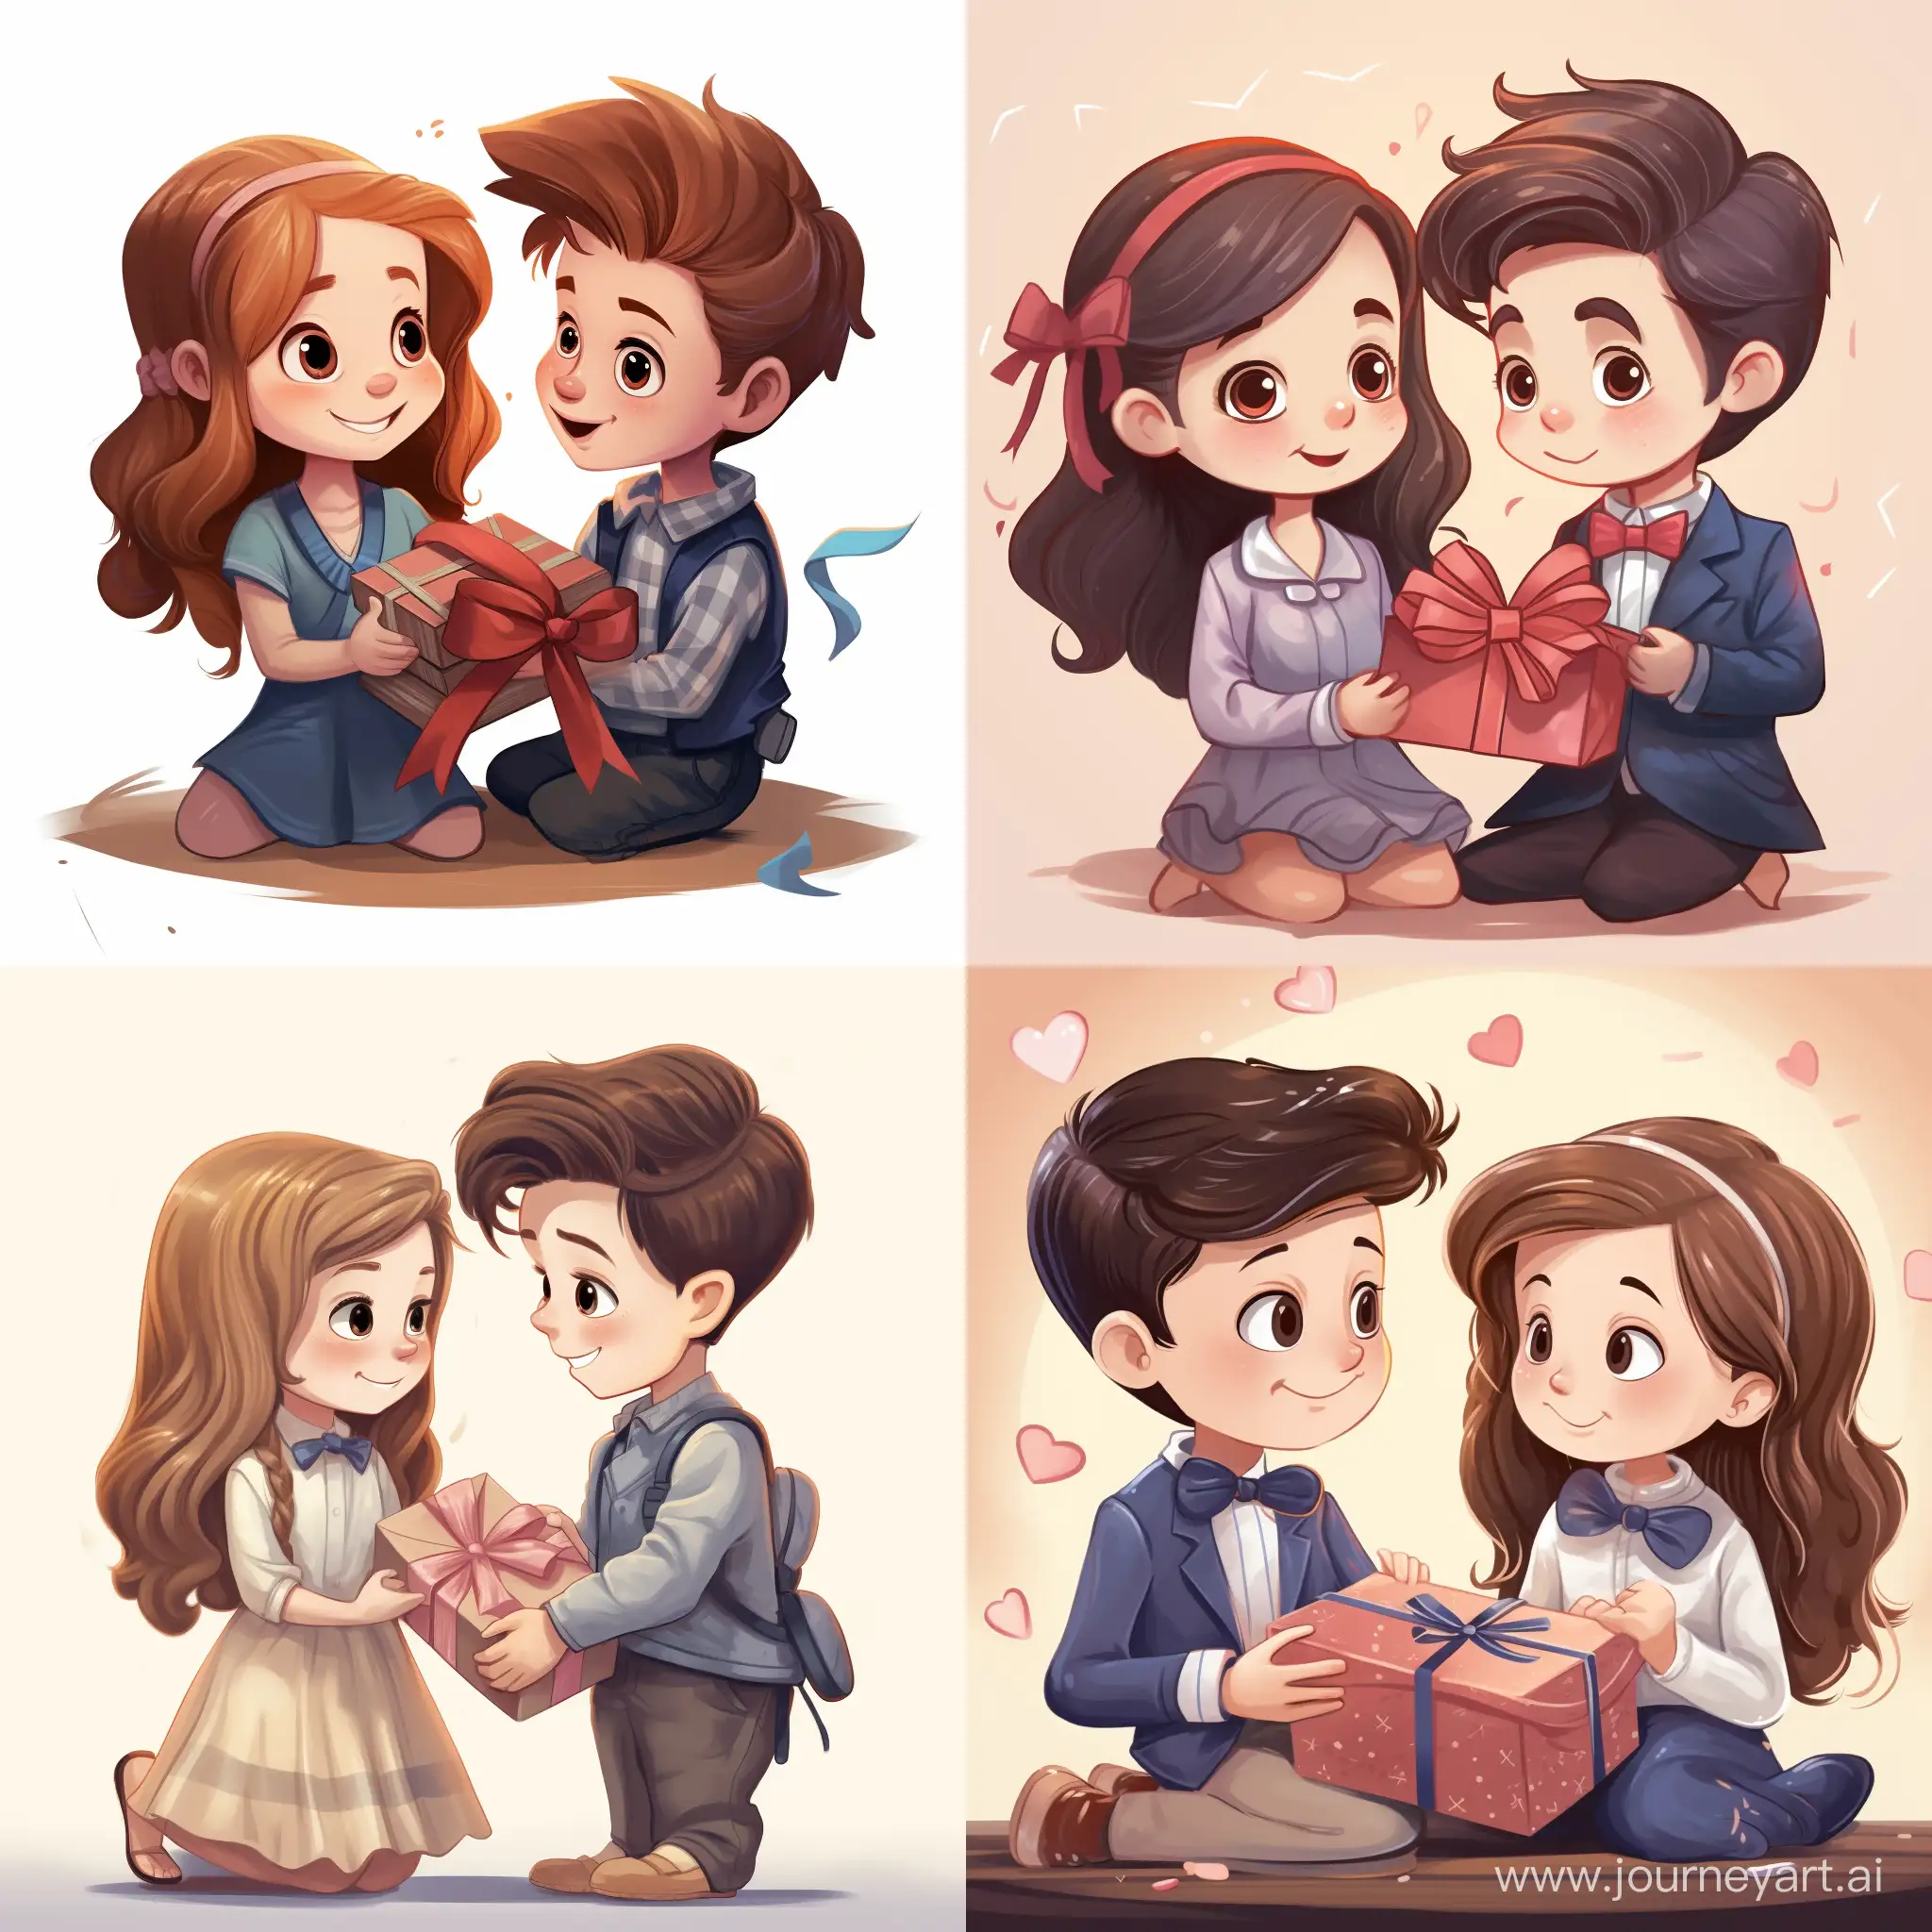 Adorable-Cartoon-Moment-Boy-Presents-Gifted-Book-to-Girl-with-a-Ribbon